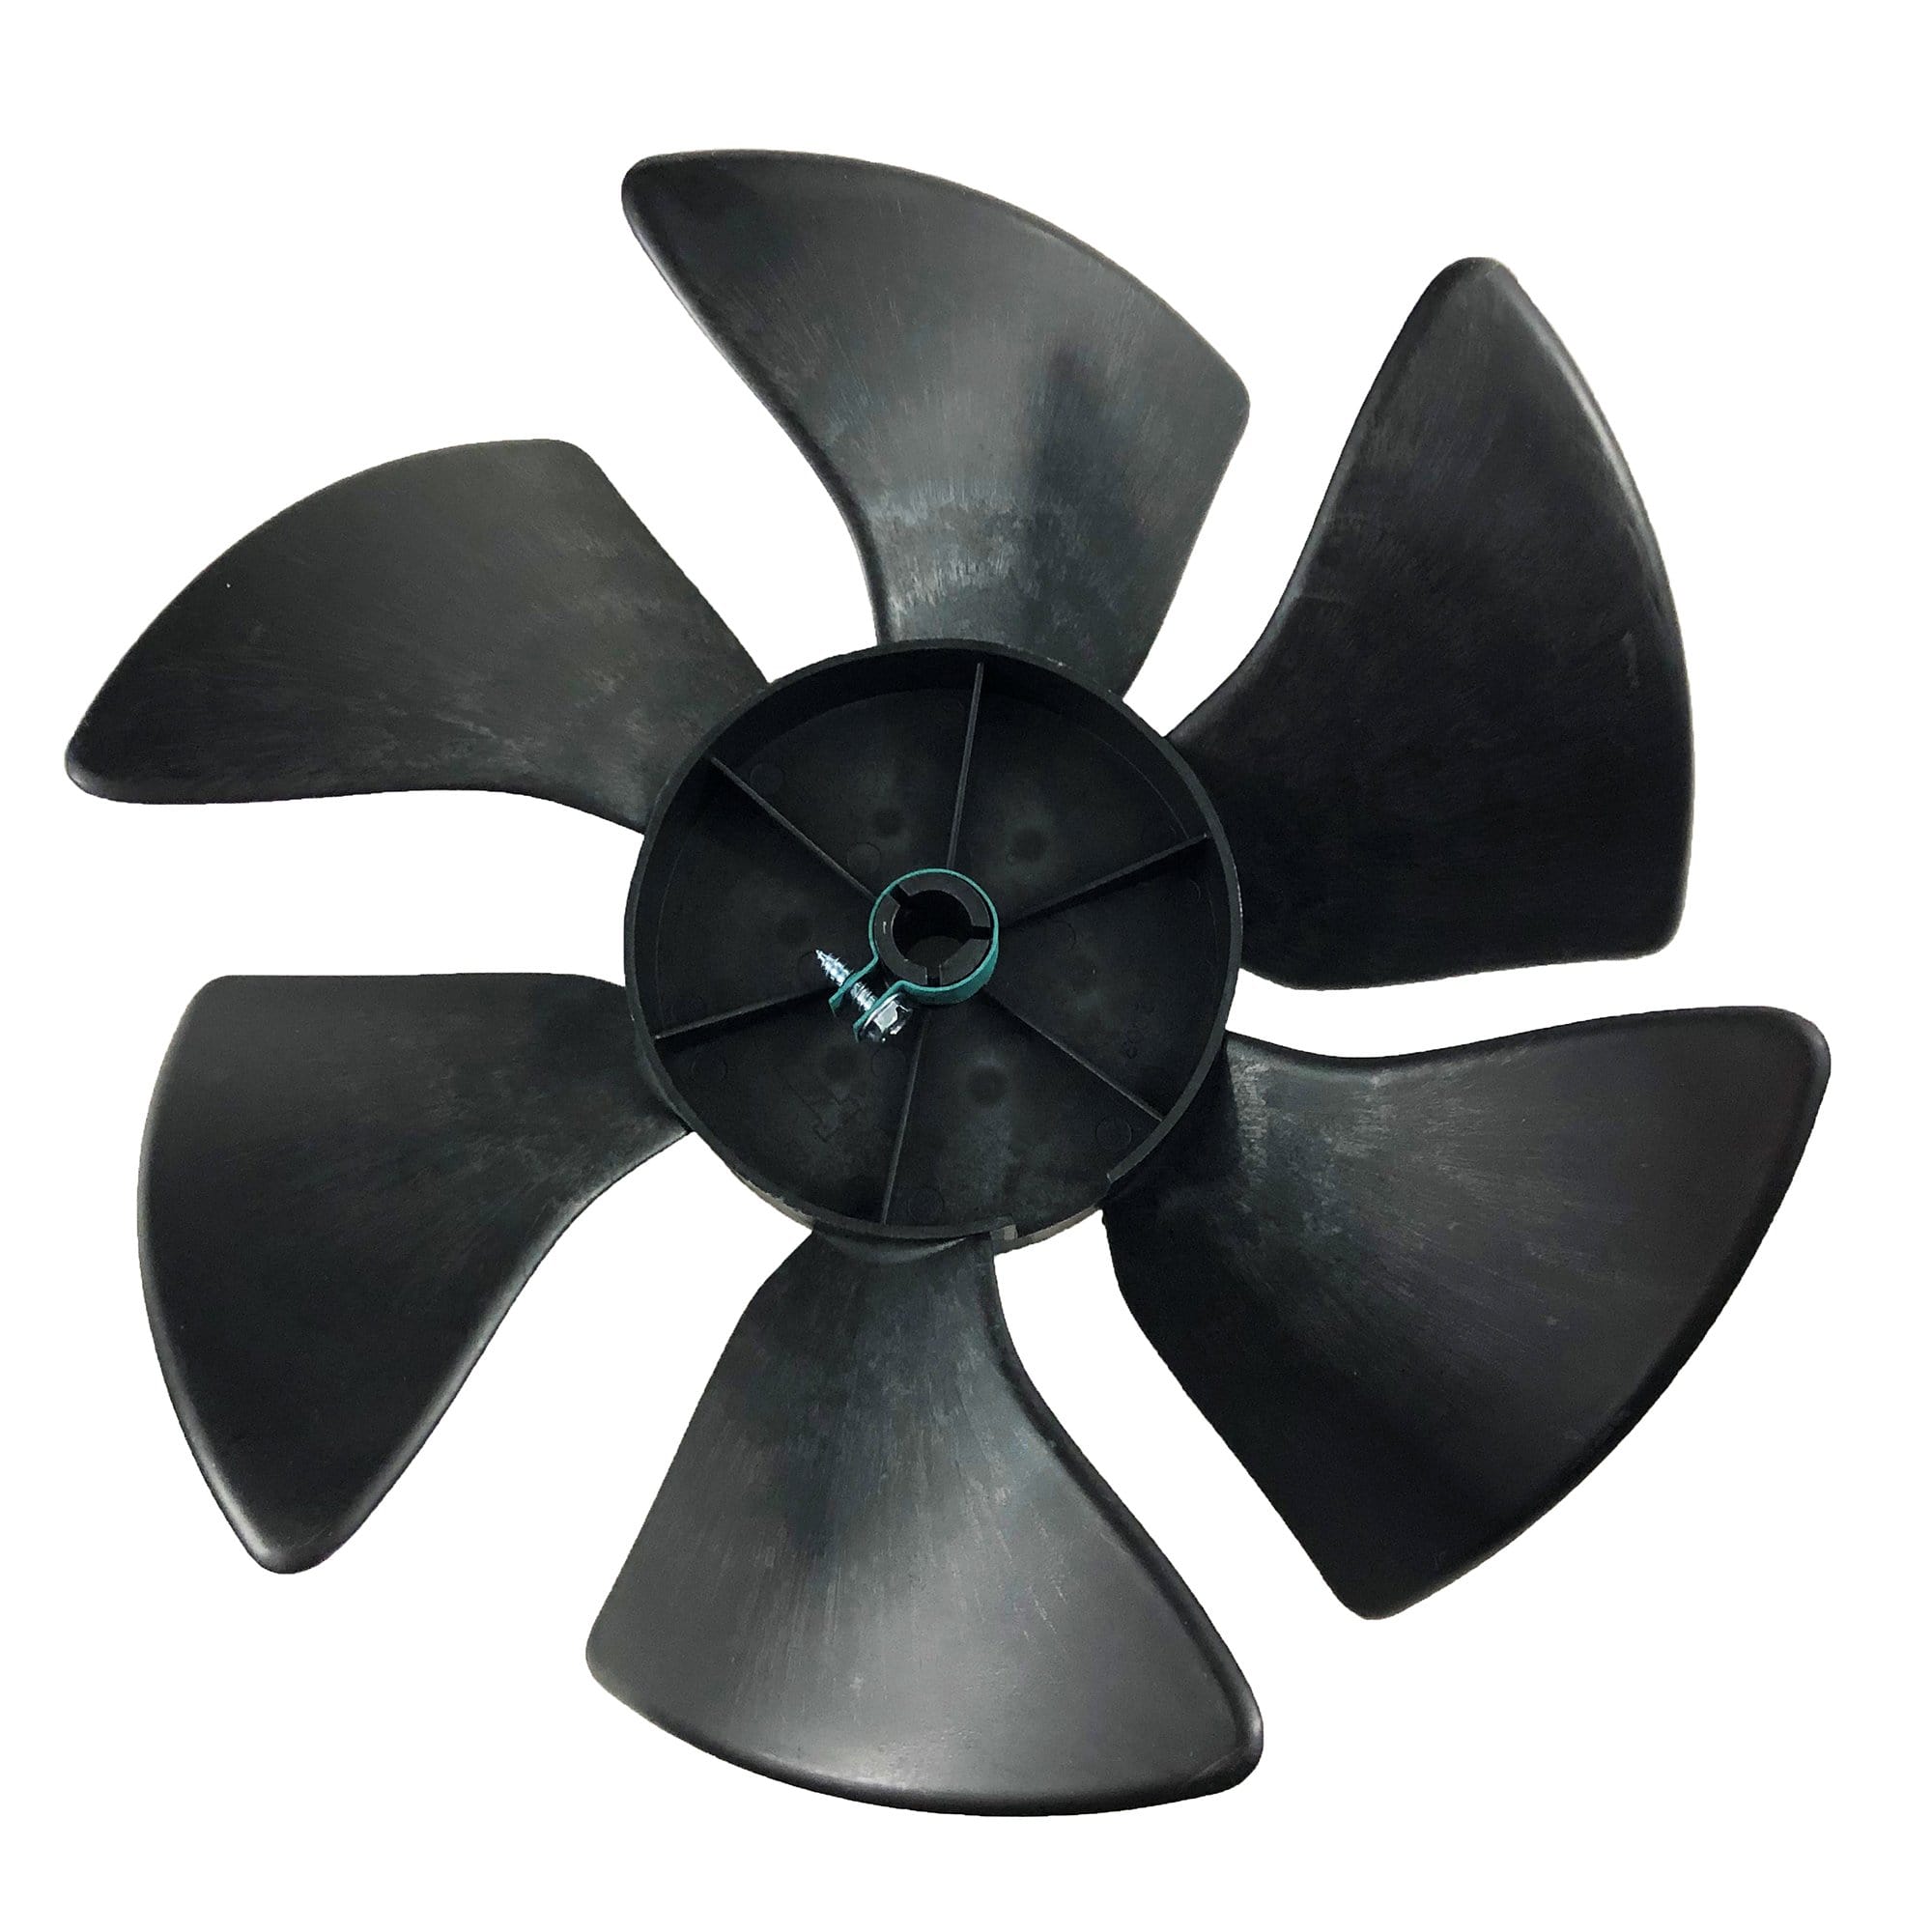 Dometic 3310709.005 Replacement Brisk Air II Fan Blade